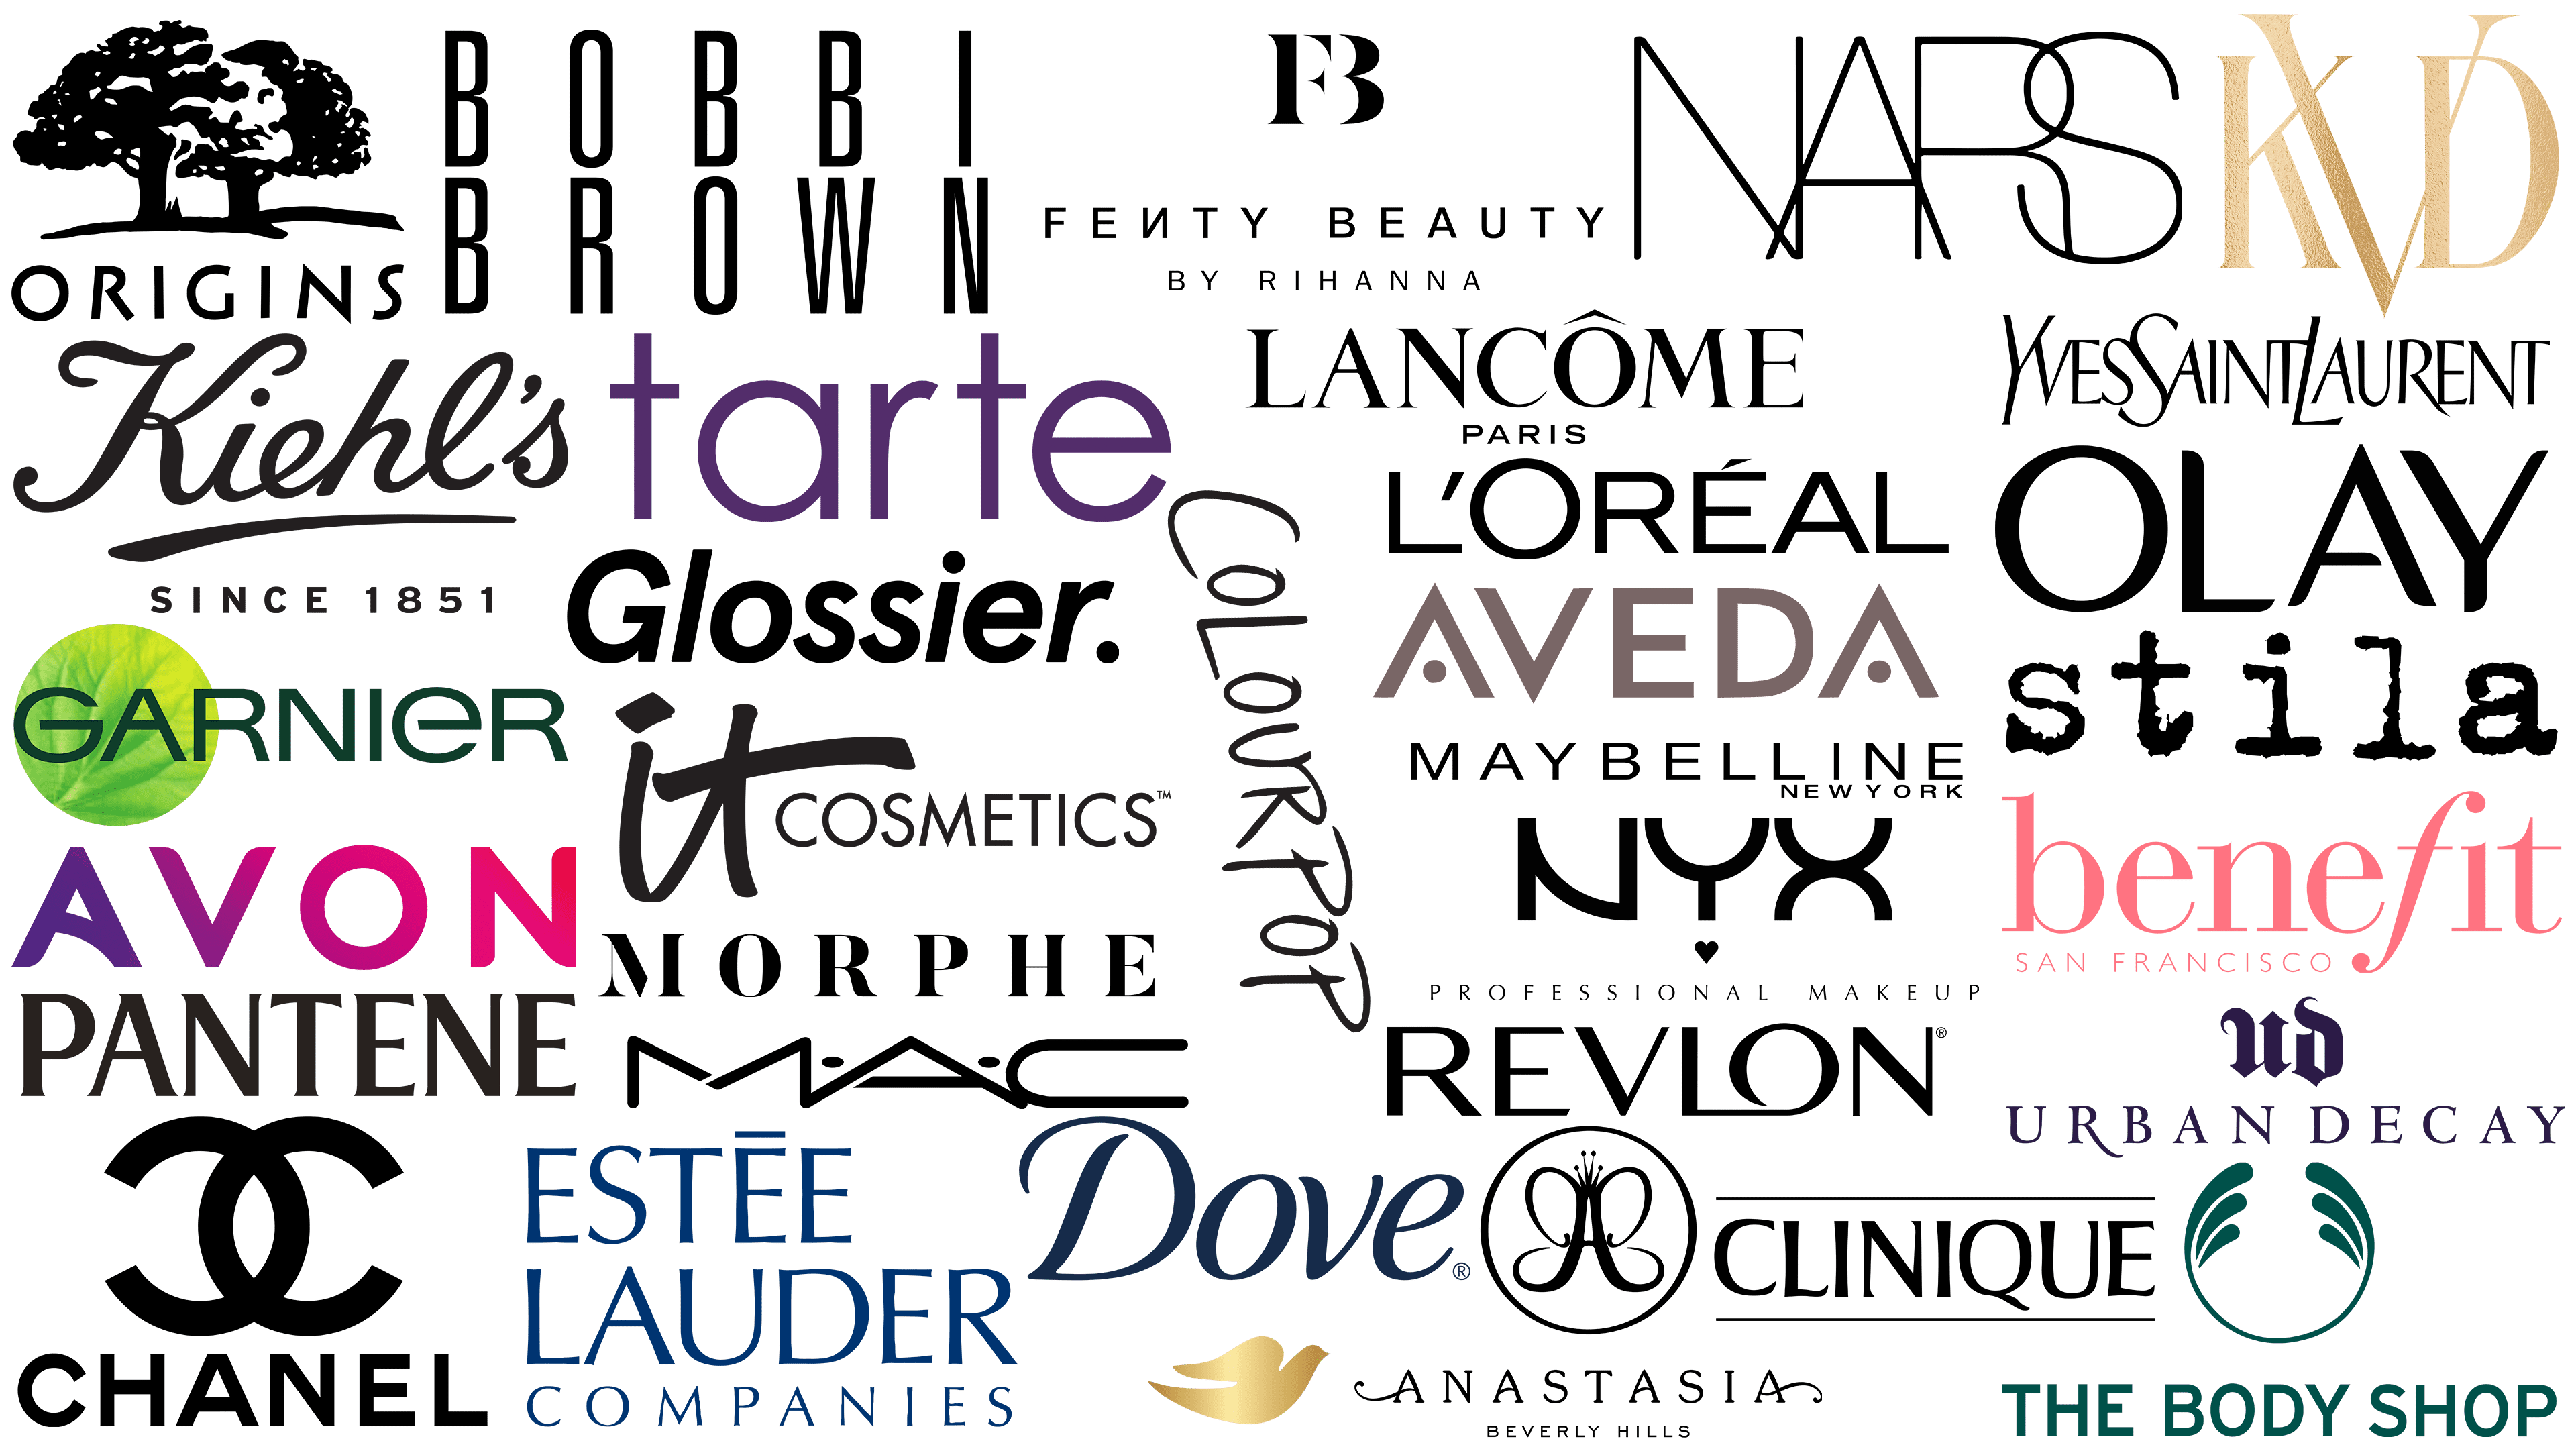 Beauty Brand Logos: Famous Cosmetic and Makeup Brand Logos